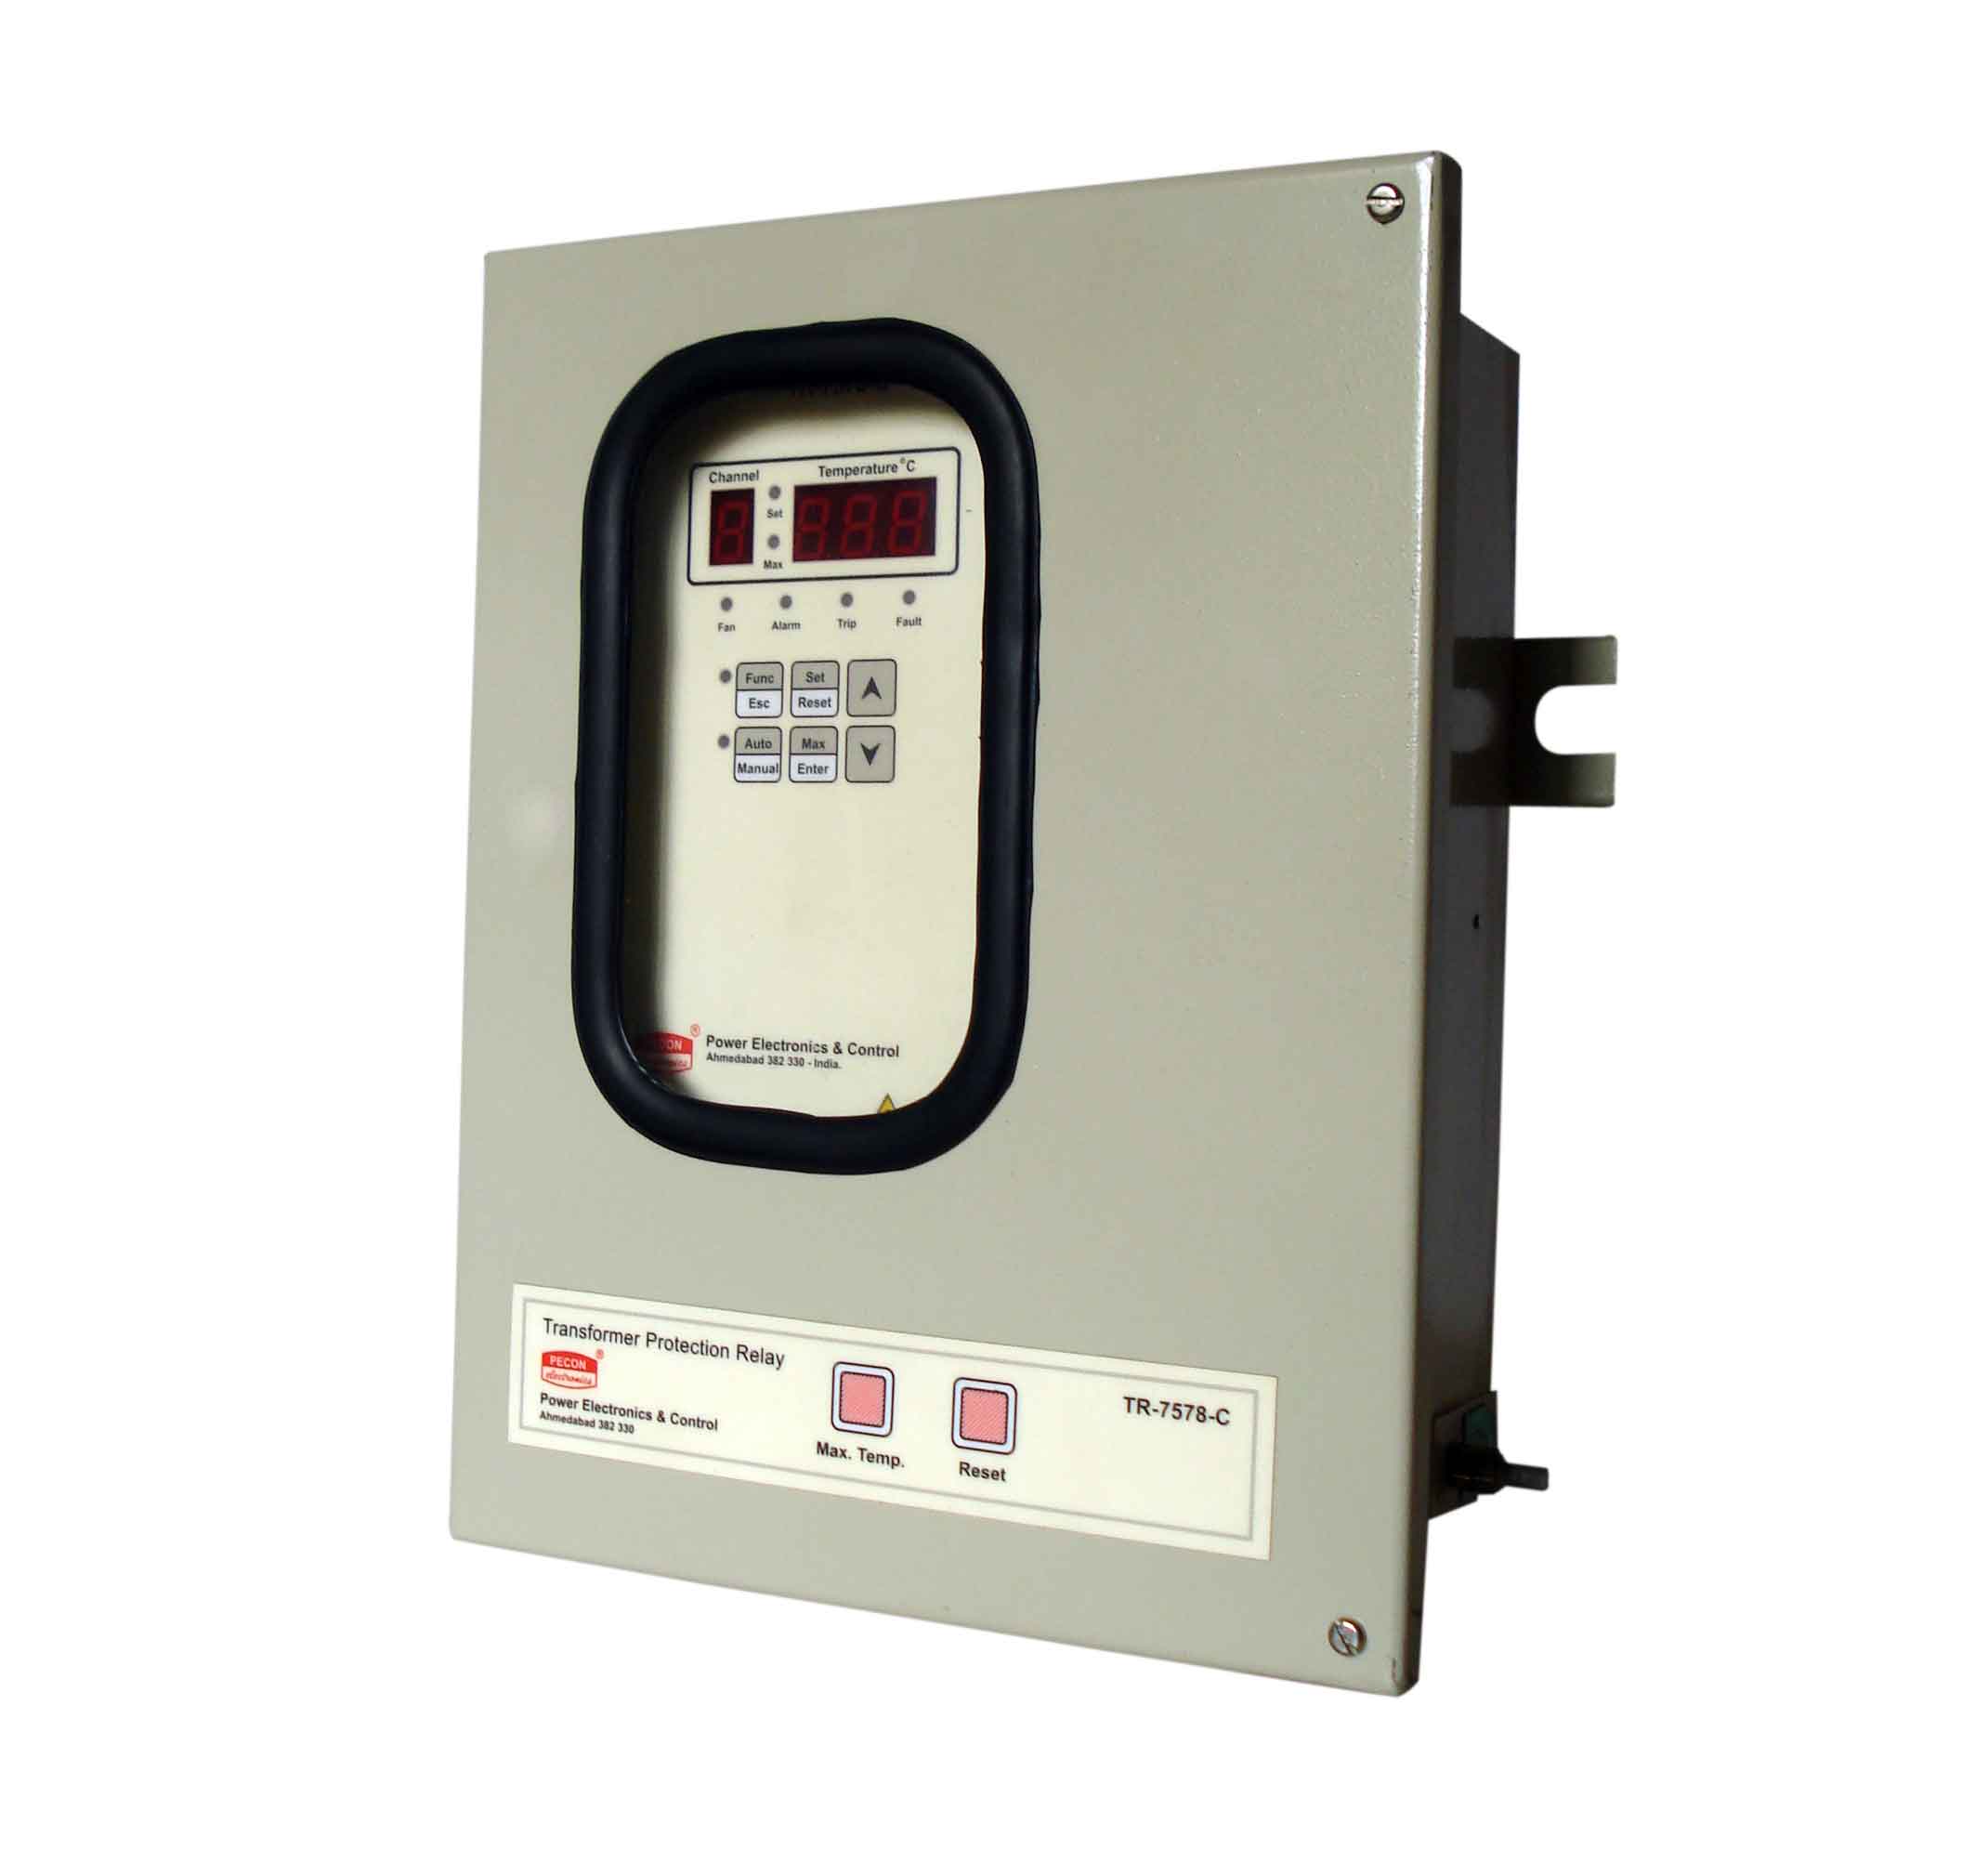 TR 7578 C Eight channel temperature scanner with RS 485 remote output Transformer Protection Relay